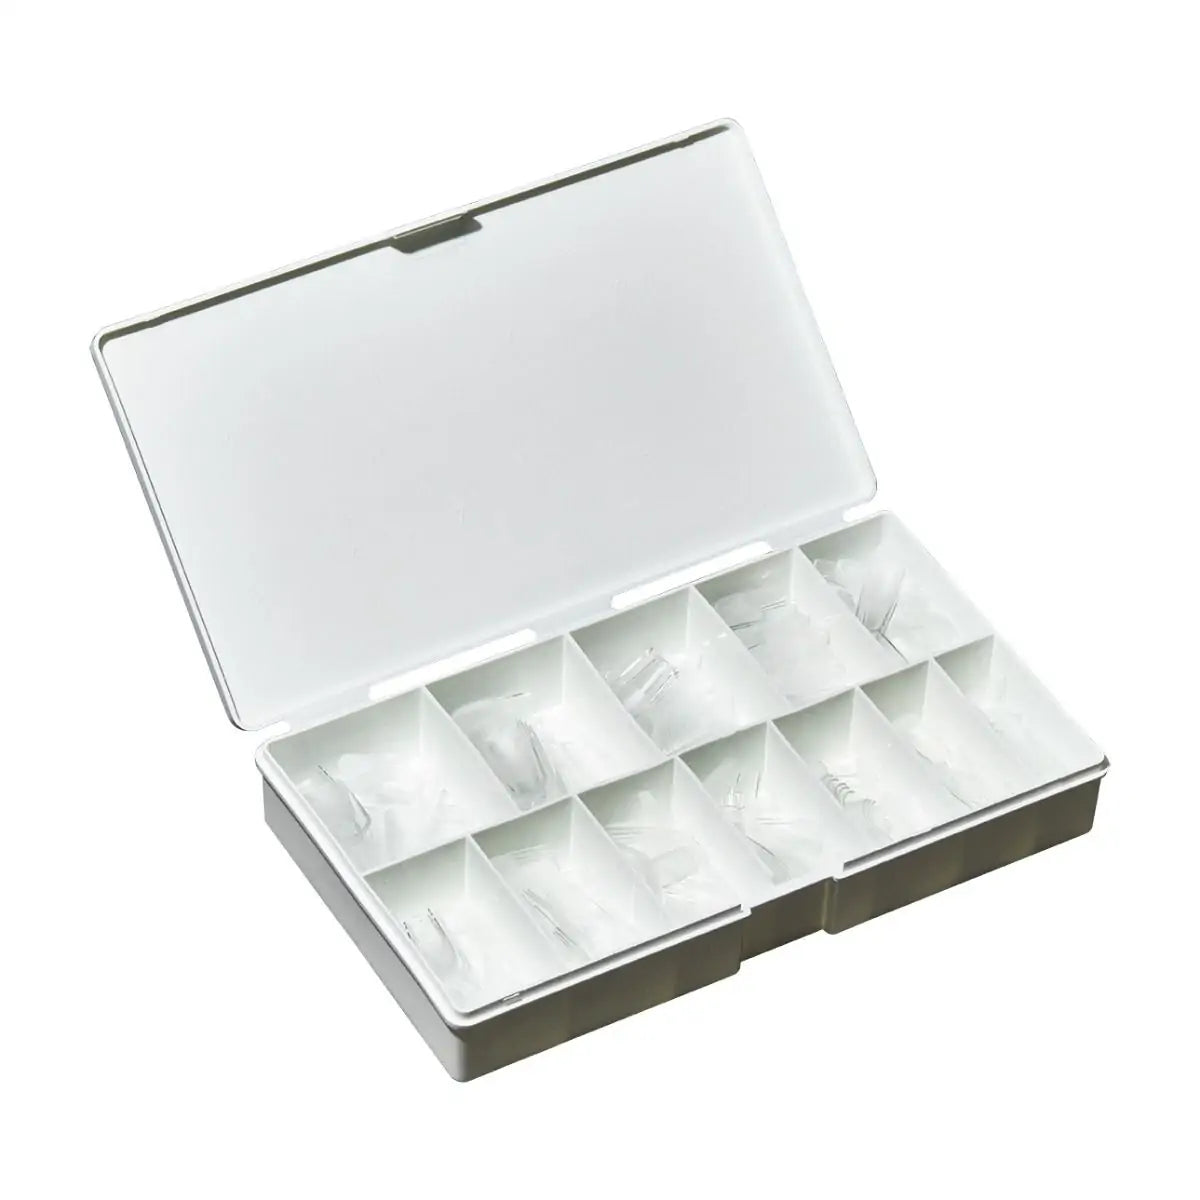 ibd SOFT GEL TIPS - MEDIUM SQUARE - PRE-ETCHED - 504 TIPS/12 SIZES